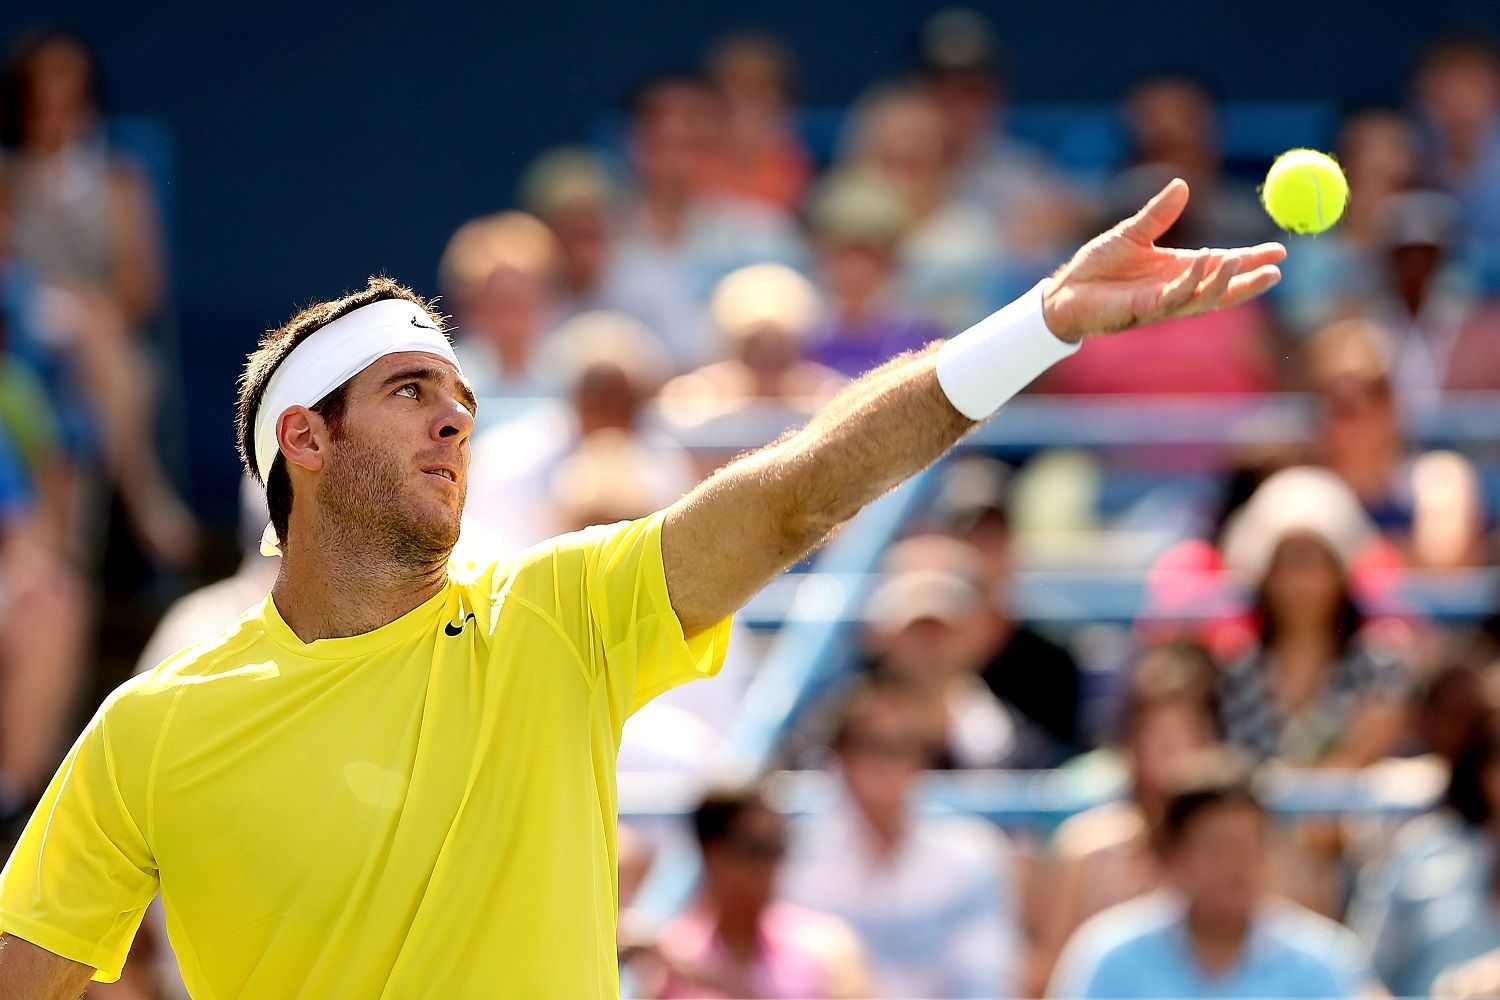 WASHINGTON, DC - AUGUST 04:  Juan Martin Del Potro of Argentina returns a shot to John Isner during the final of the Citi Open at the William H.G. FitzGerald Tennis Center on August 4, 2013 in Washington, DC.  (Photo by Matthew Stockman/Getty Images)